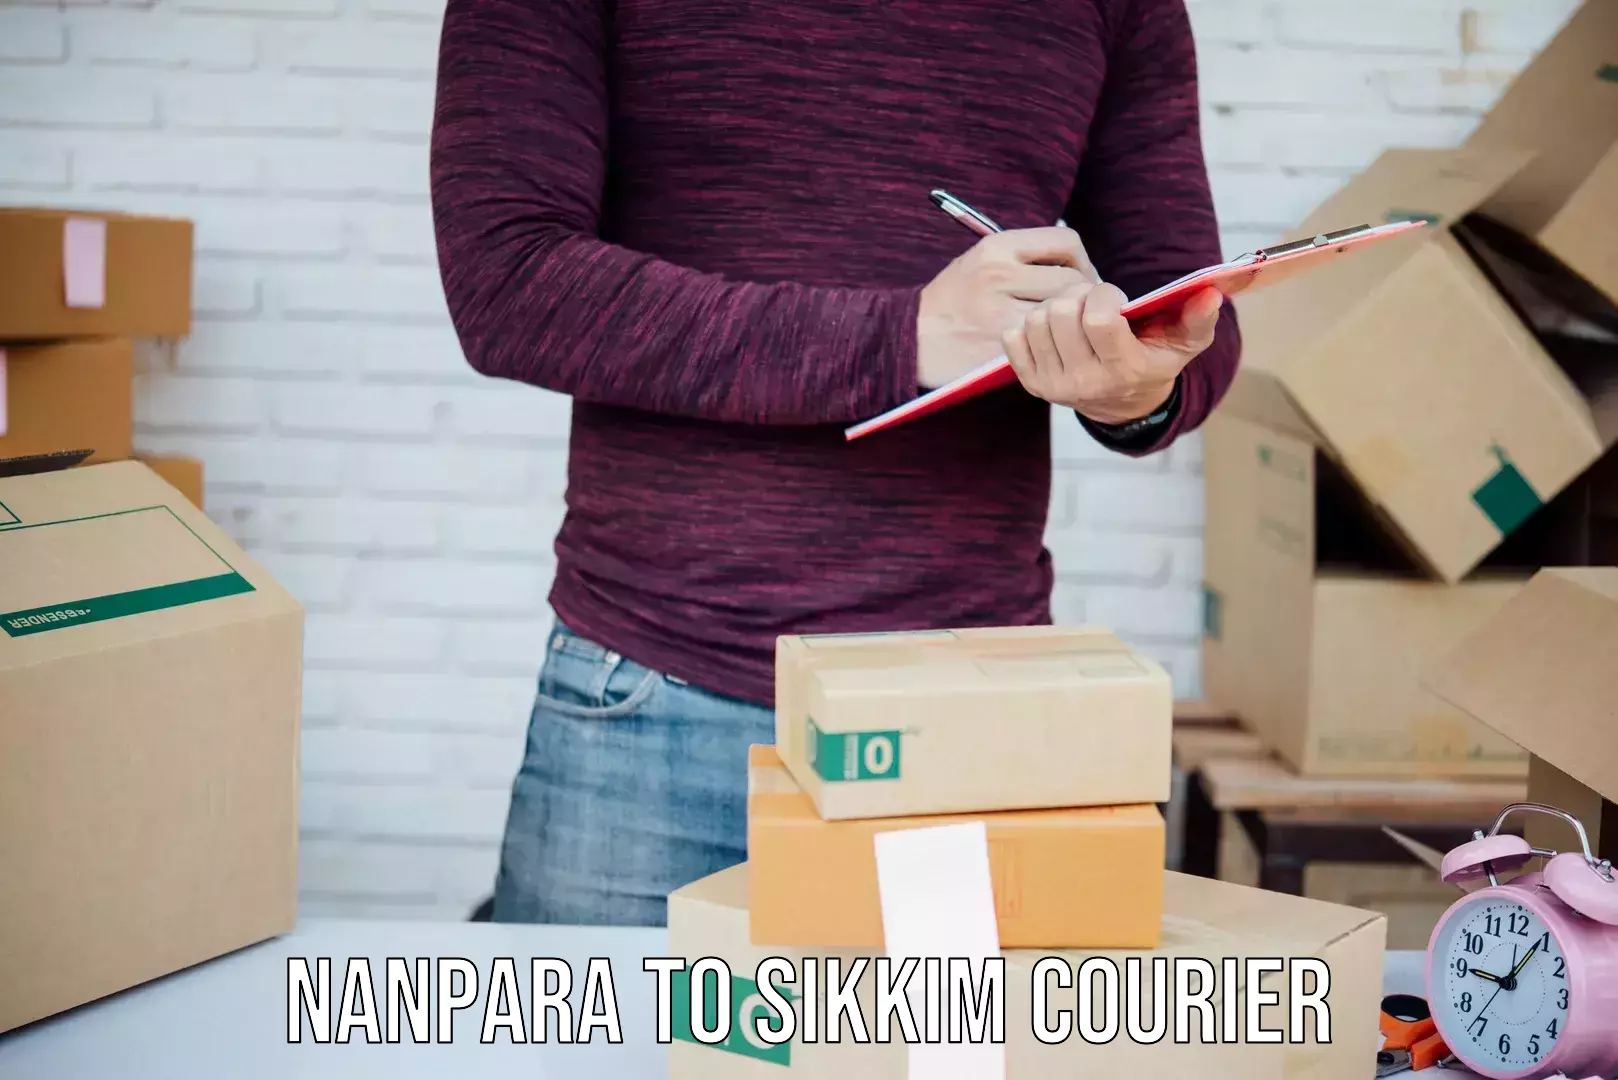 State-of-the-art courier technology Nanpara to Sikkim